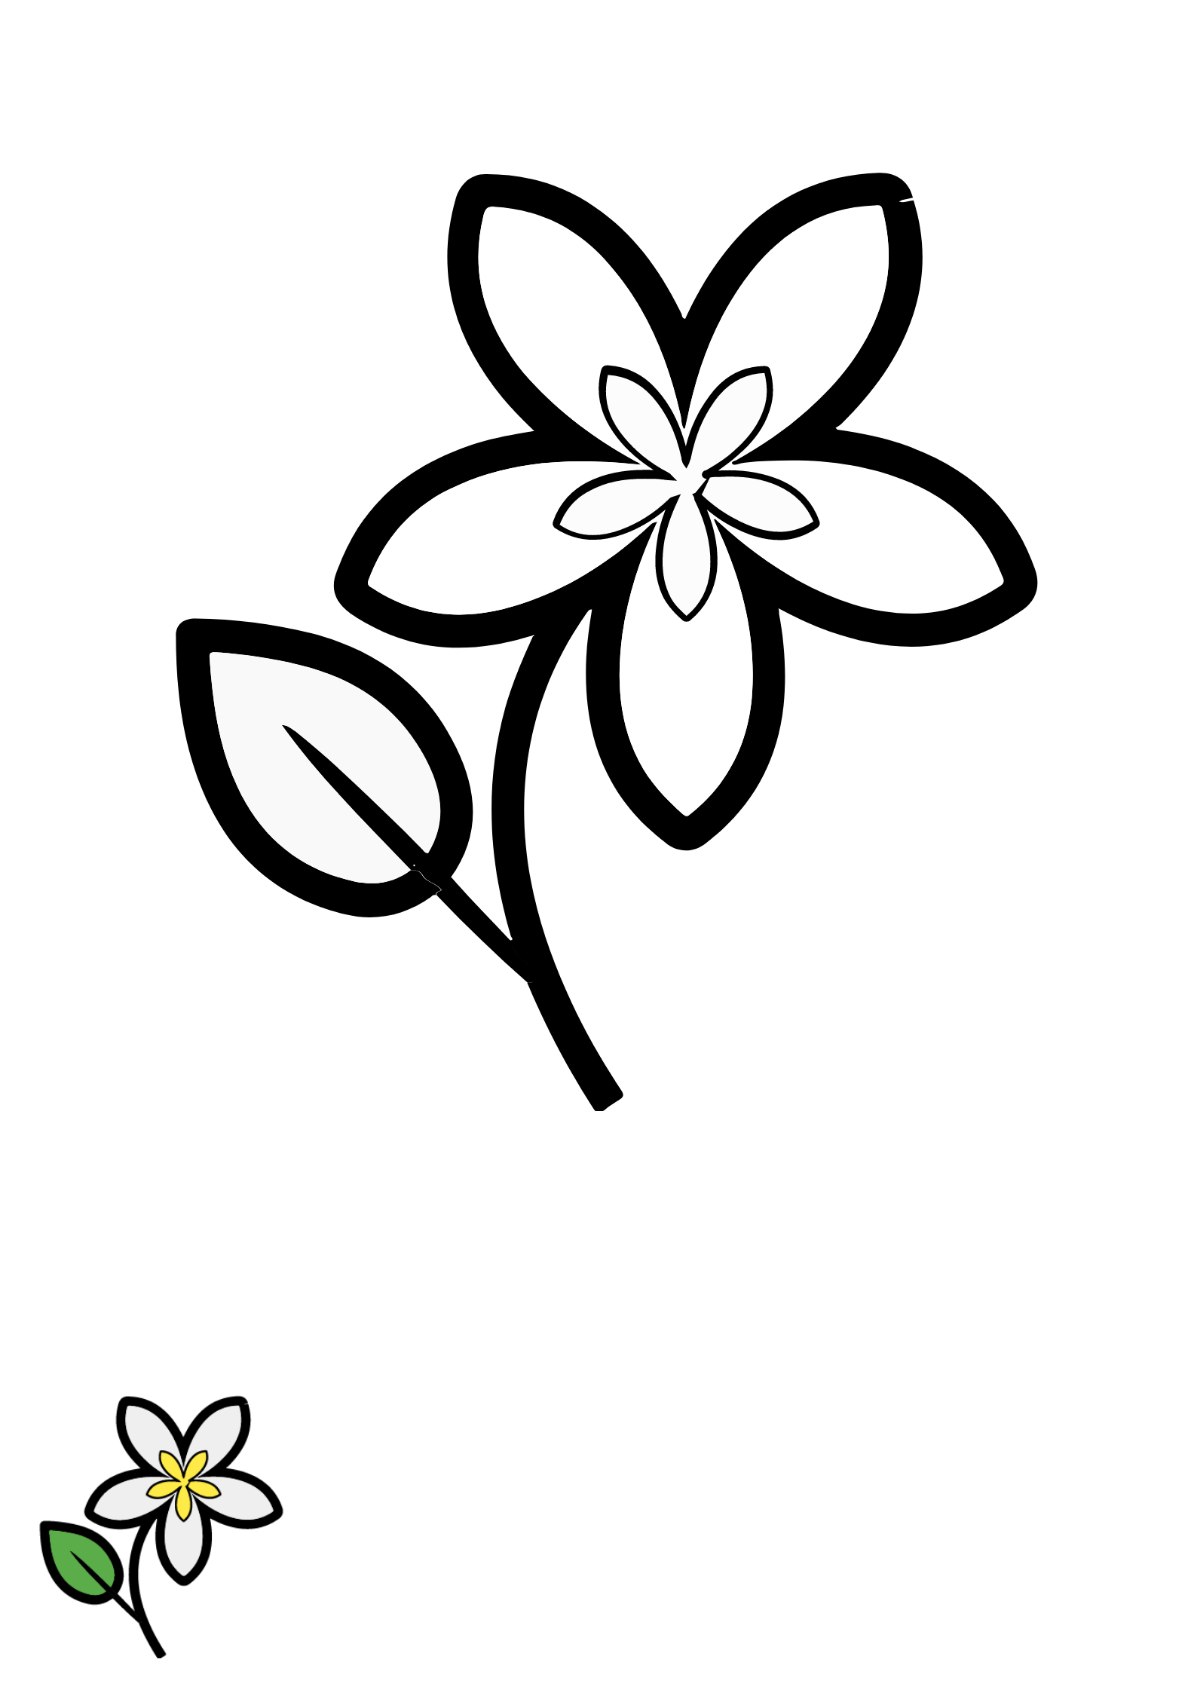 Jasmine Flower Coloring Page Template